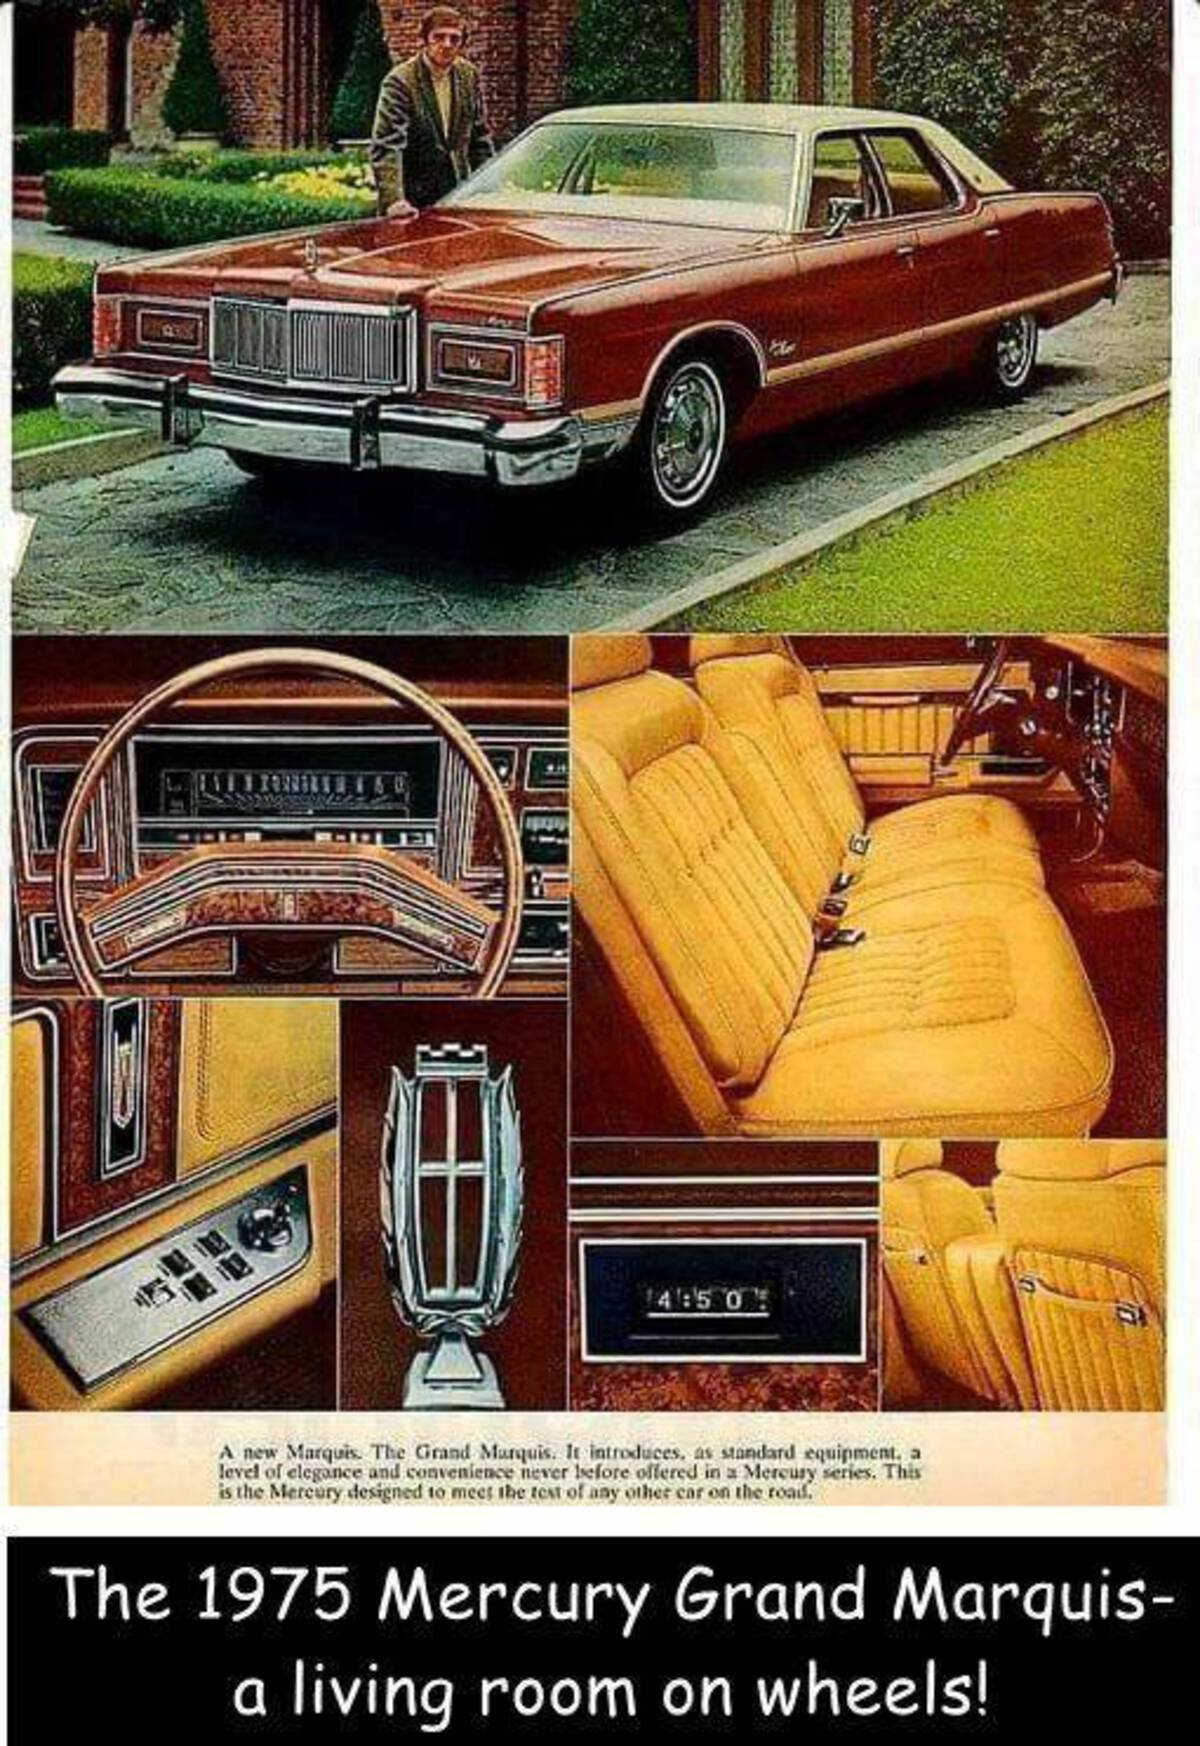 1975 grand marquis - Co BVwww 0 Ele A new Marquis. The Grand Marquis. It introduces, as standard equipment, a level of elegance and convenience never before offered in a Mercury series. This is the Mercury designed to meet the rest of any other car on the